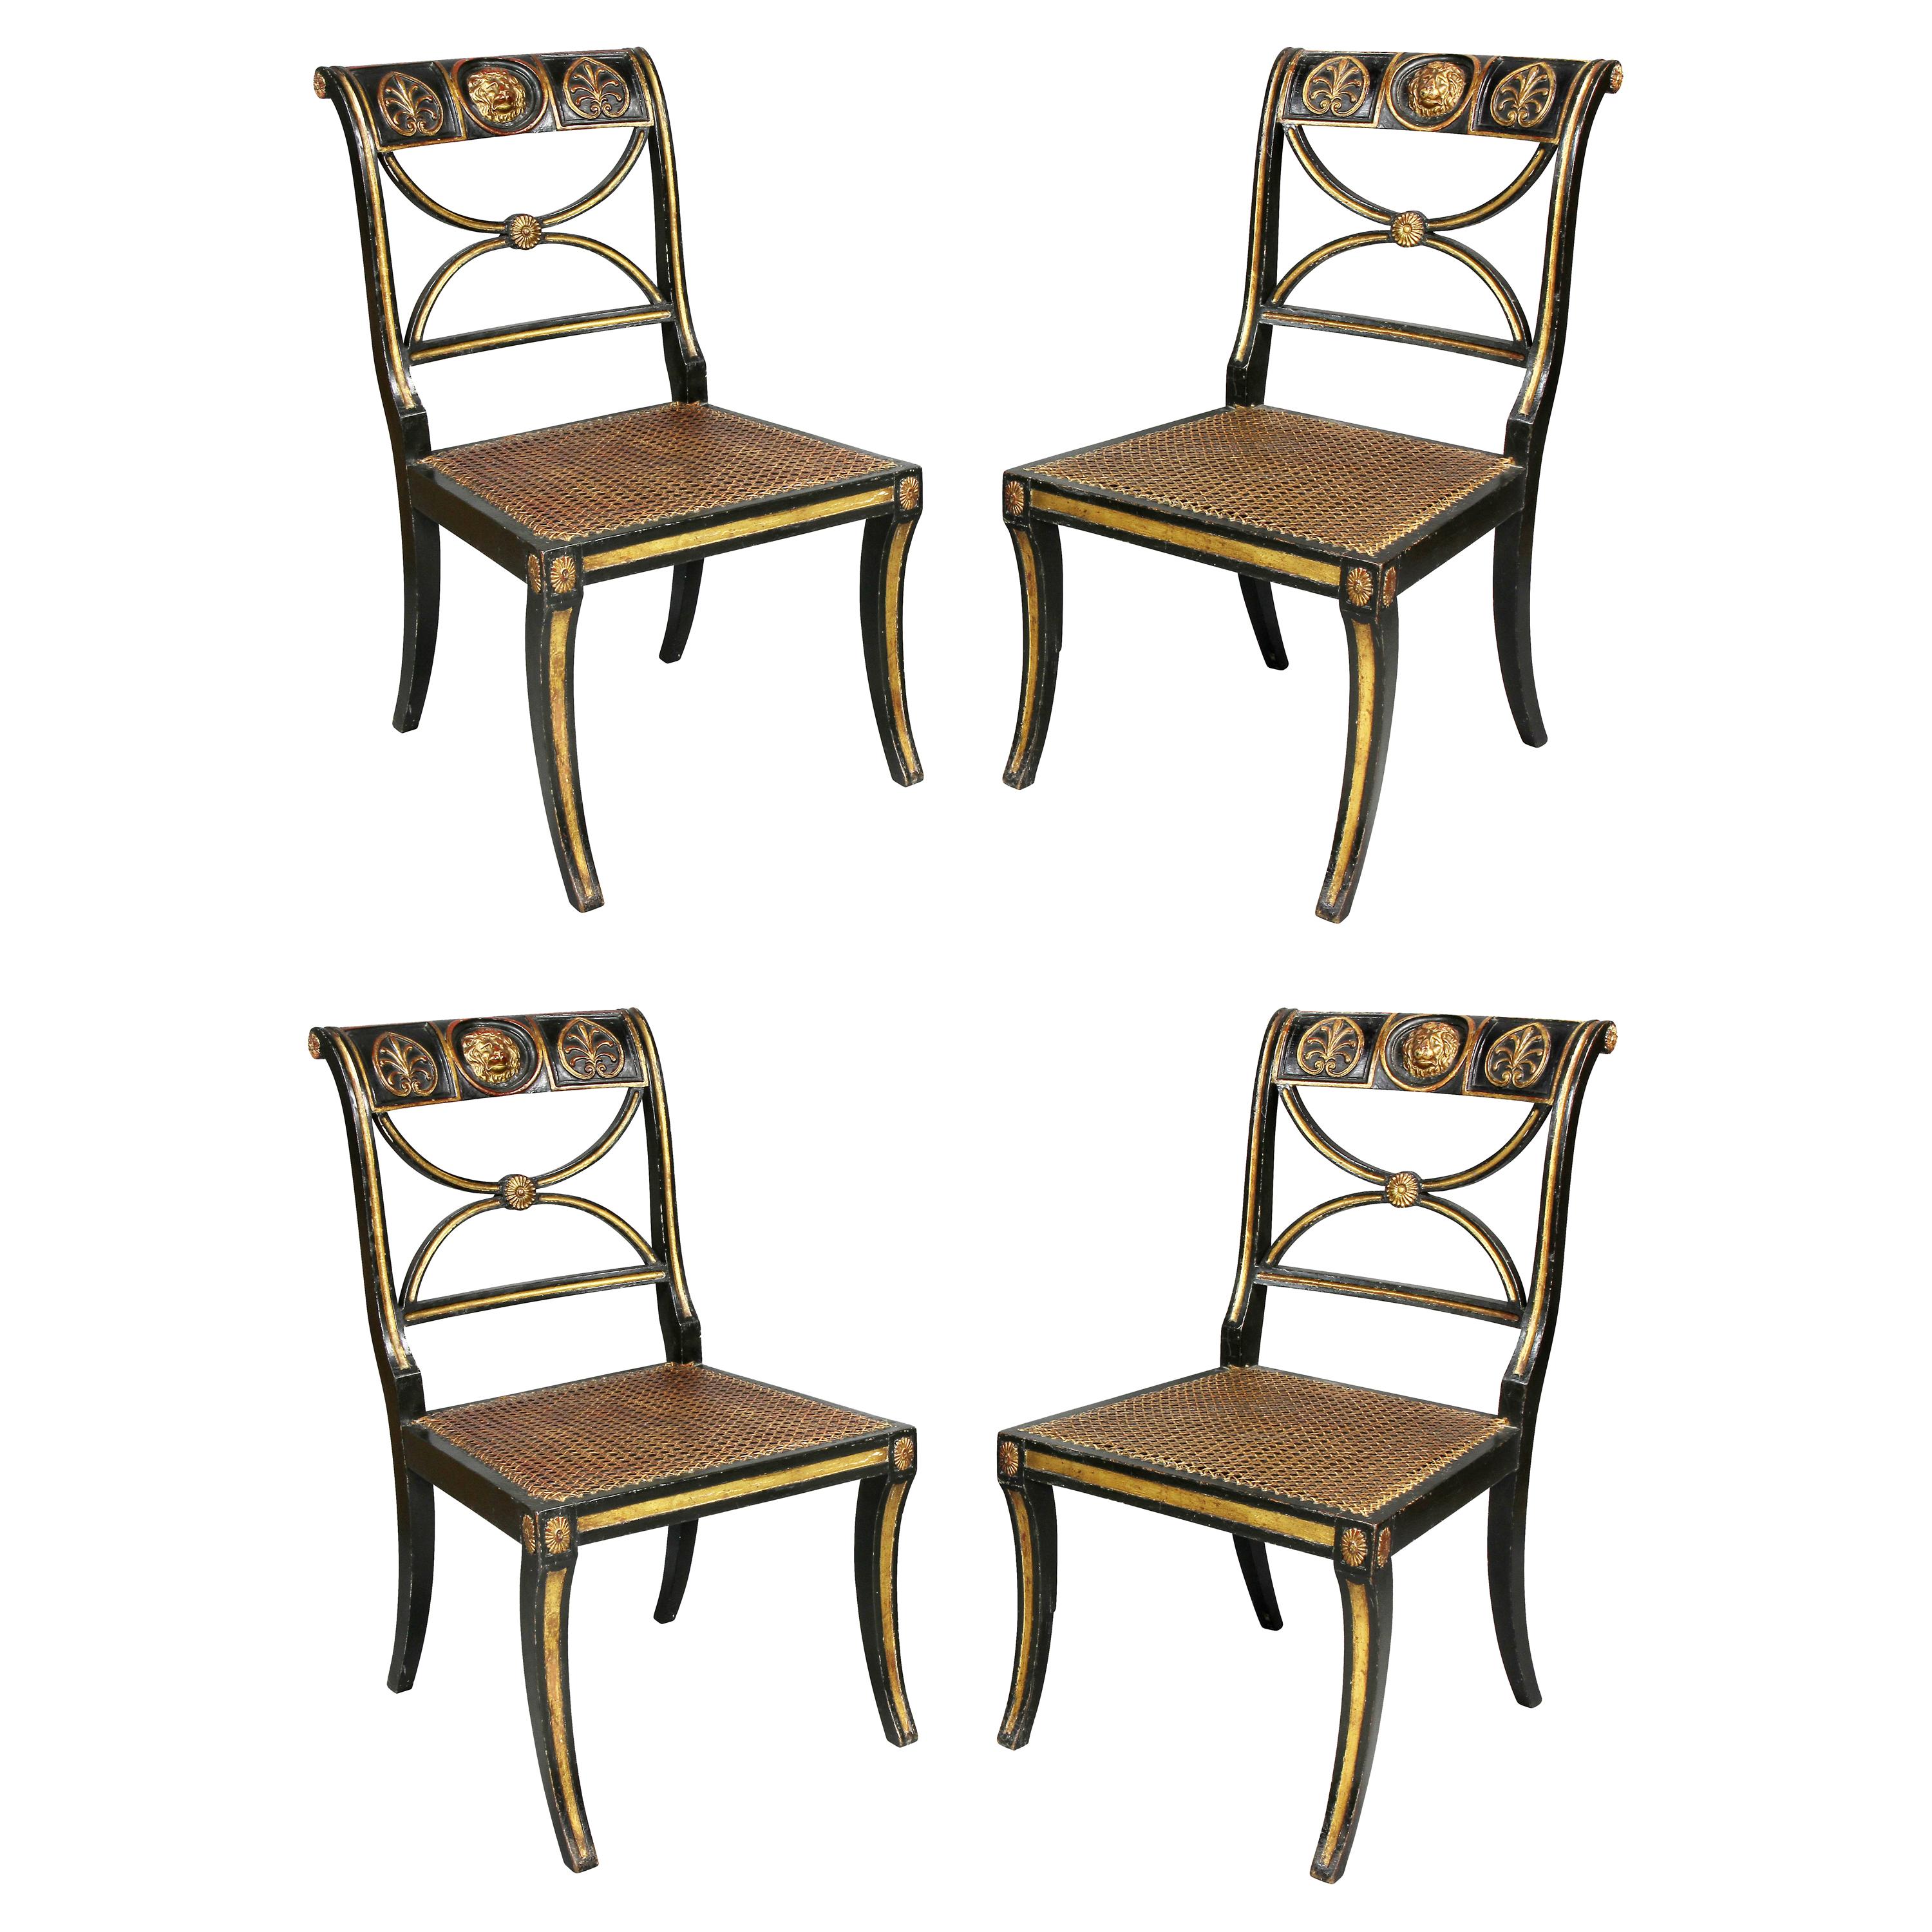 Set of Four Regency Ebonized and Giltwood Chairs